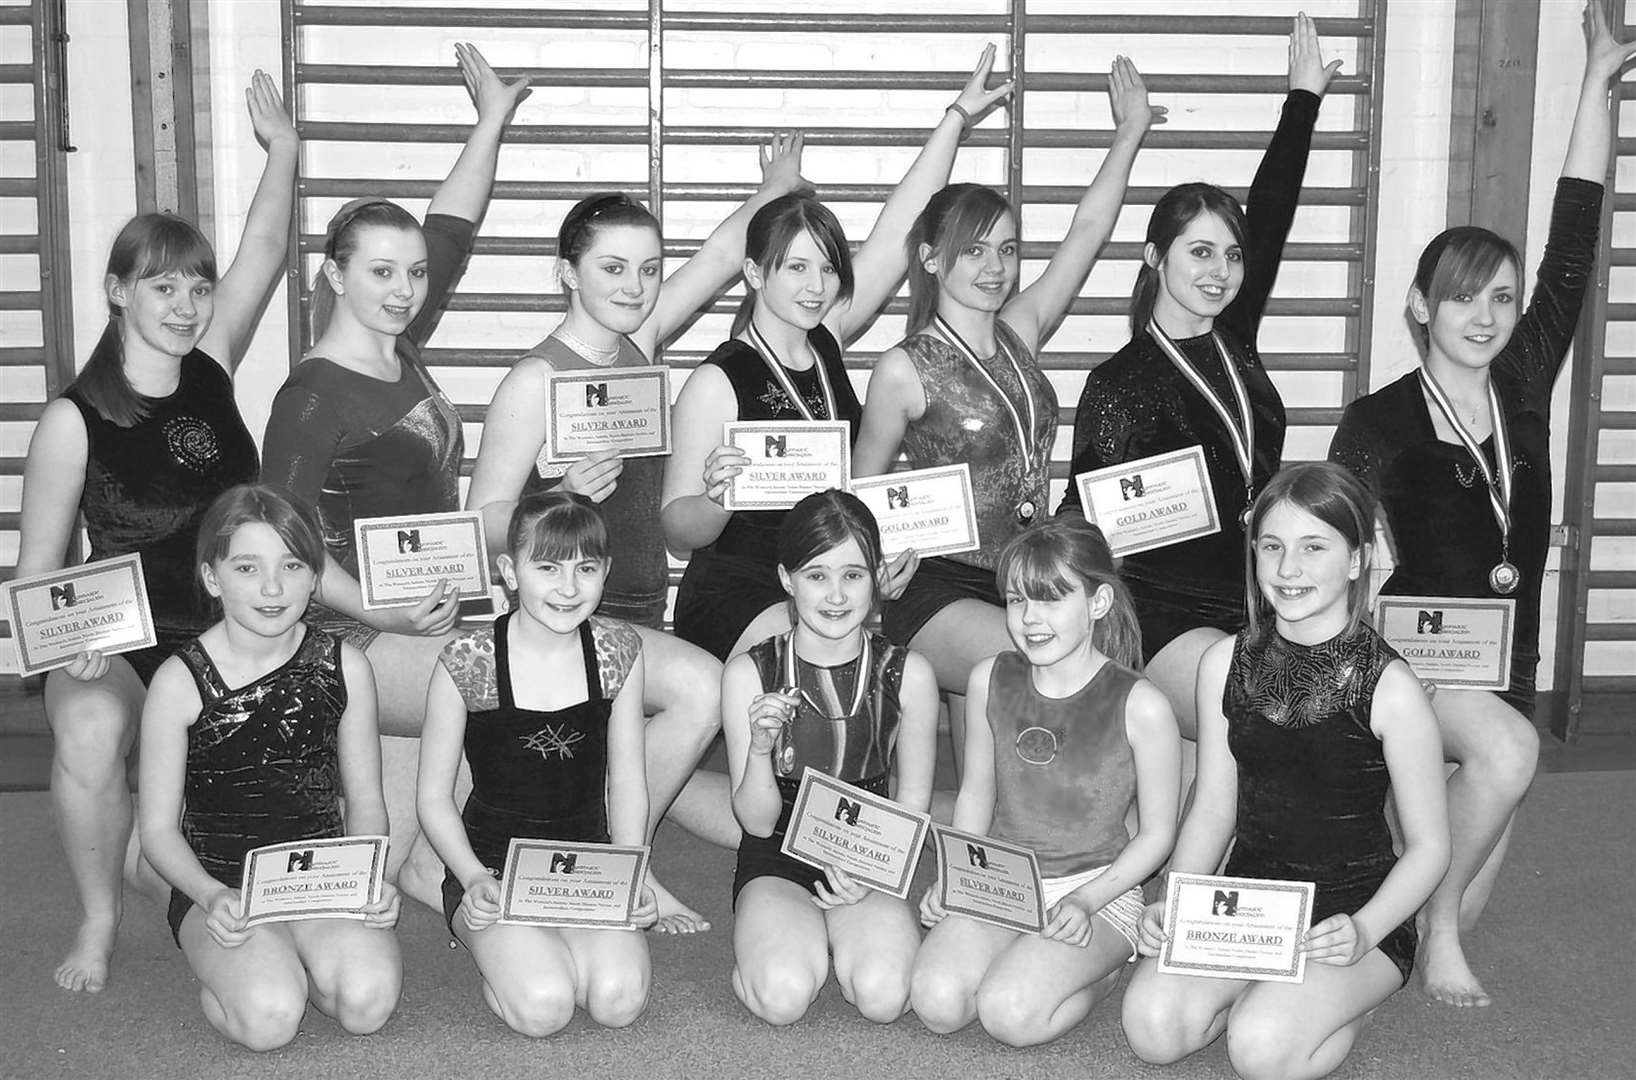 Members of Caithness Gymnastics Club who travelled to Huntly to compete in the north district championships in 2008.